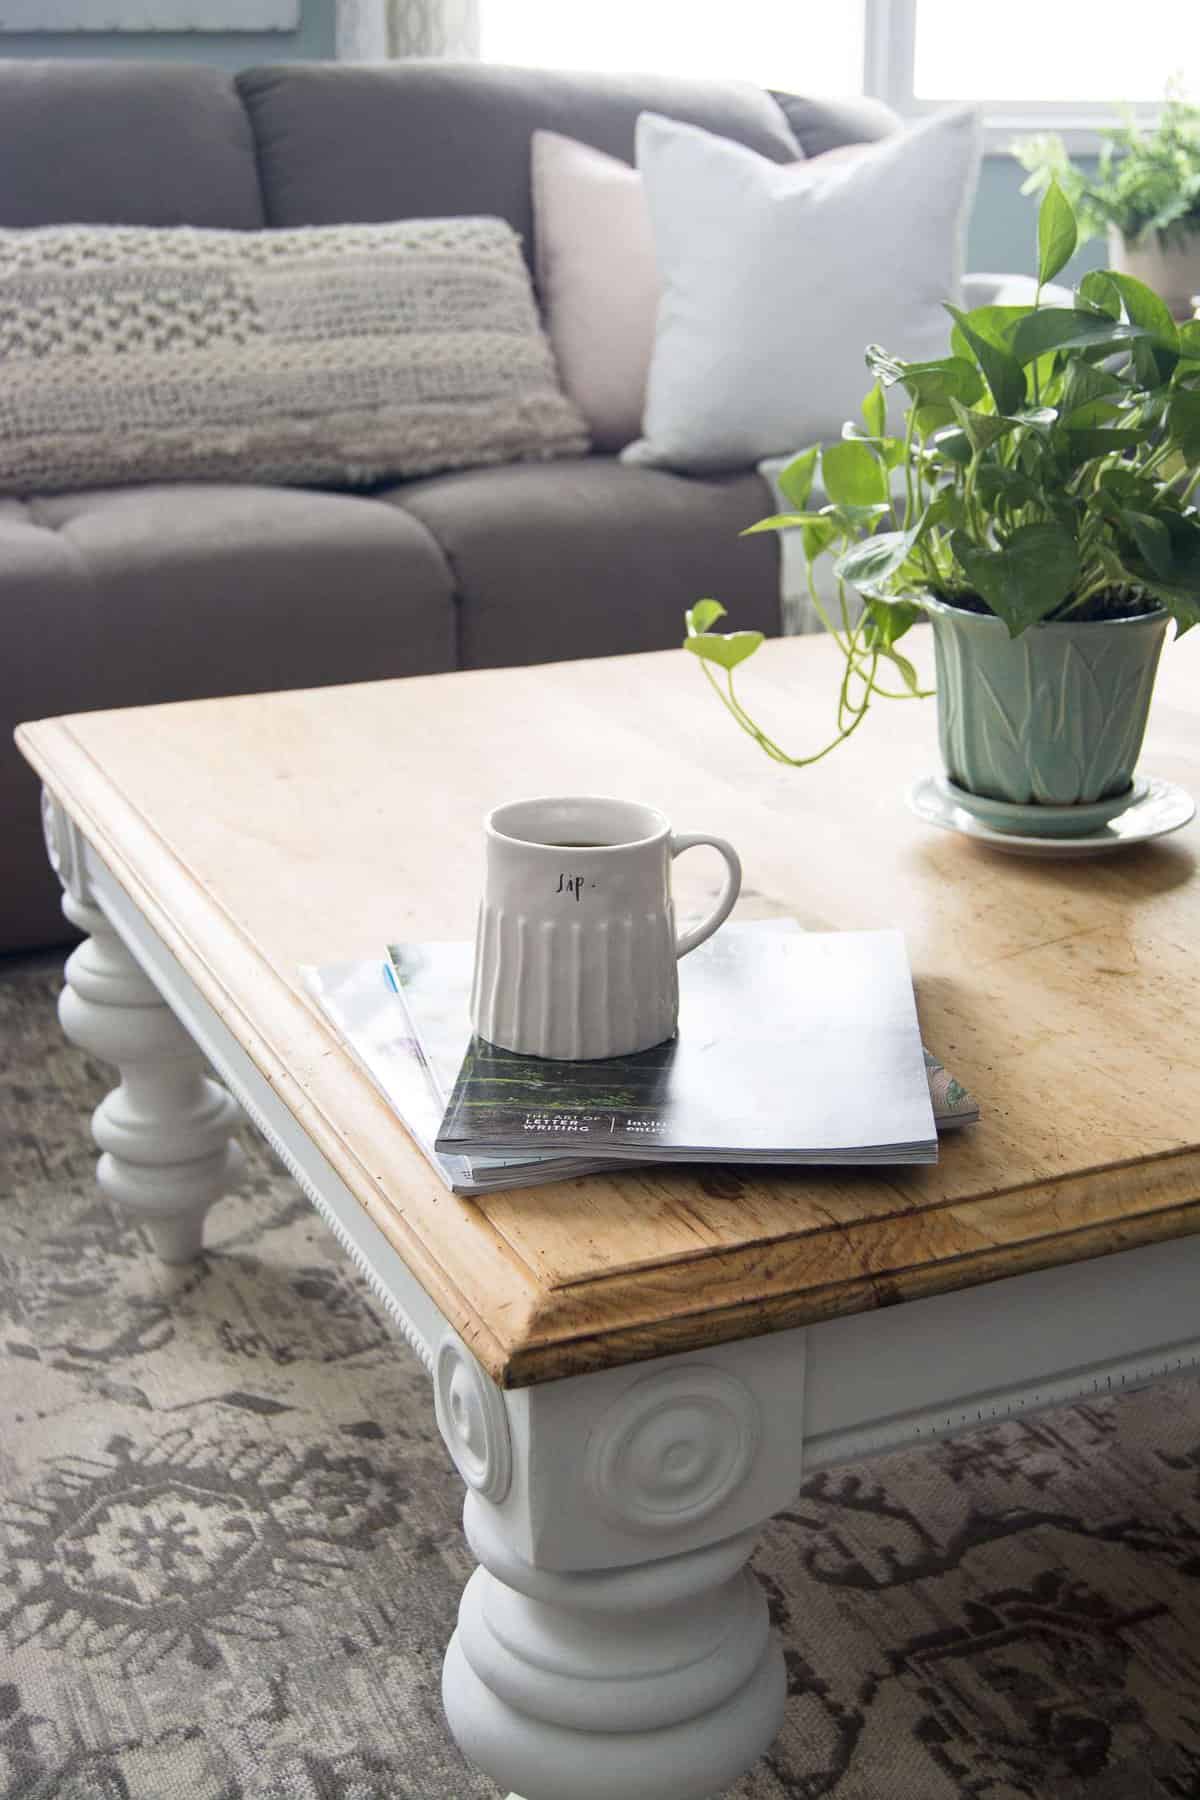 If you're looking for an easy and inexpensive way to transform a thrifted coffee table then this is the post for you! I've taken a thrifted coffee table and made it the modern farmhouse table of my dreams with this DIY coffee table transformation.